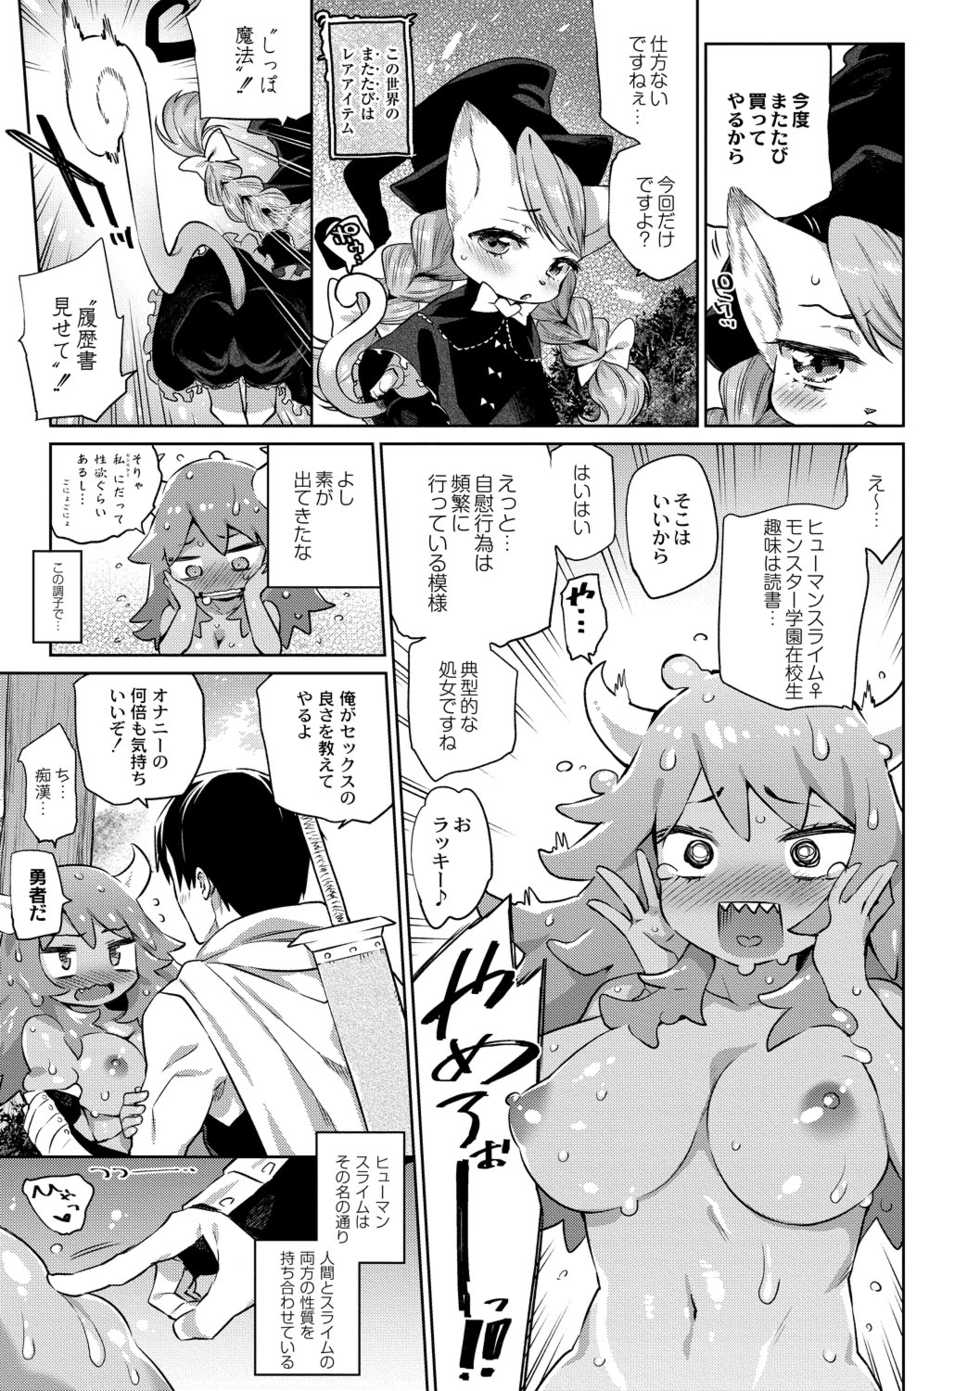 [Mizone] Monster Musume no Otoshikata - How to Corrupt a Monster Girl [Digital] - Page 18